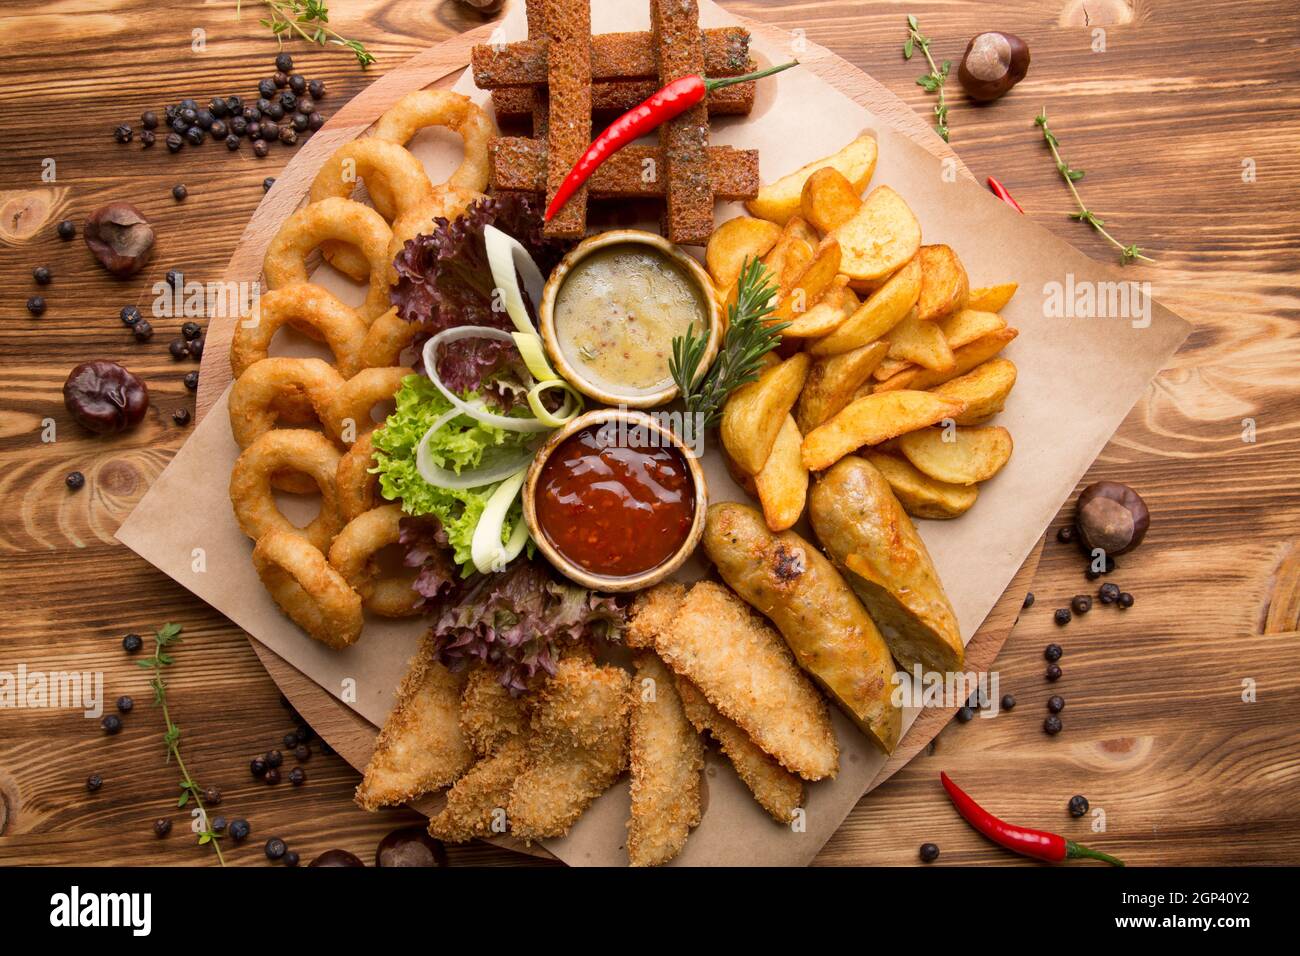 fried snack for beer. Large plate of beer snacks: croutons, fried onion rings in batter, french fries, potato wedges. Hot sauce and cheese sauce for s Stock Photo